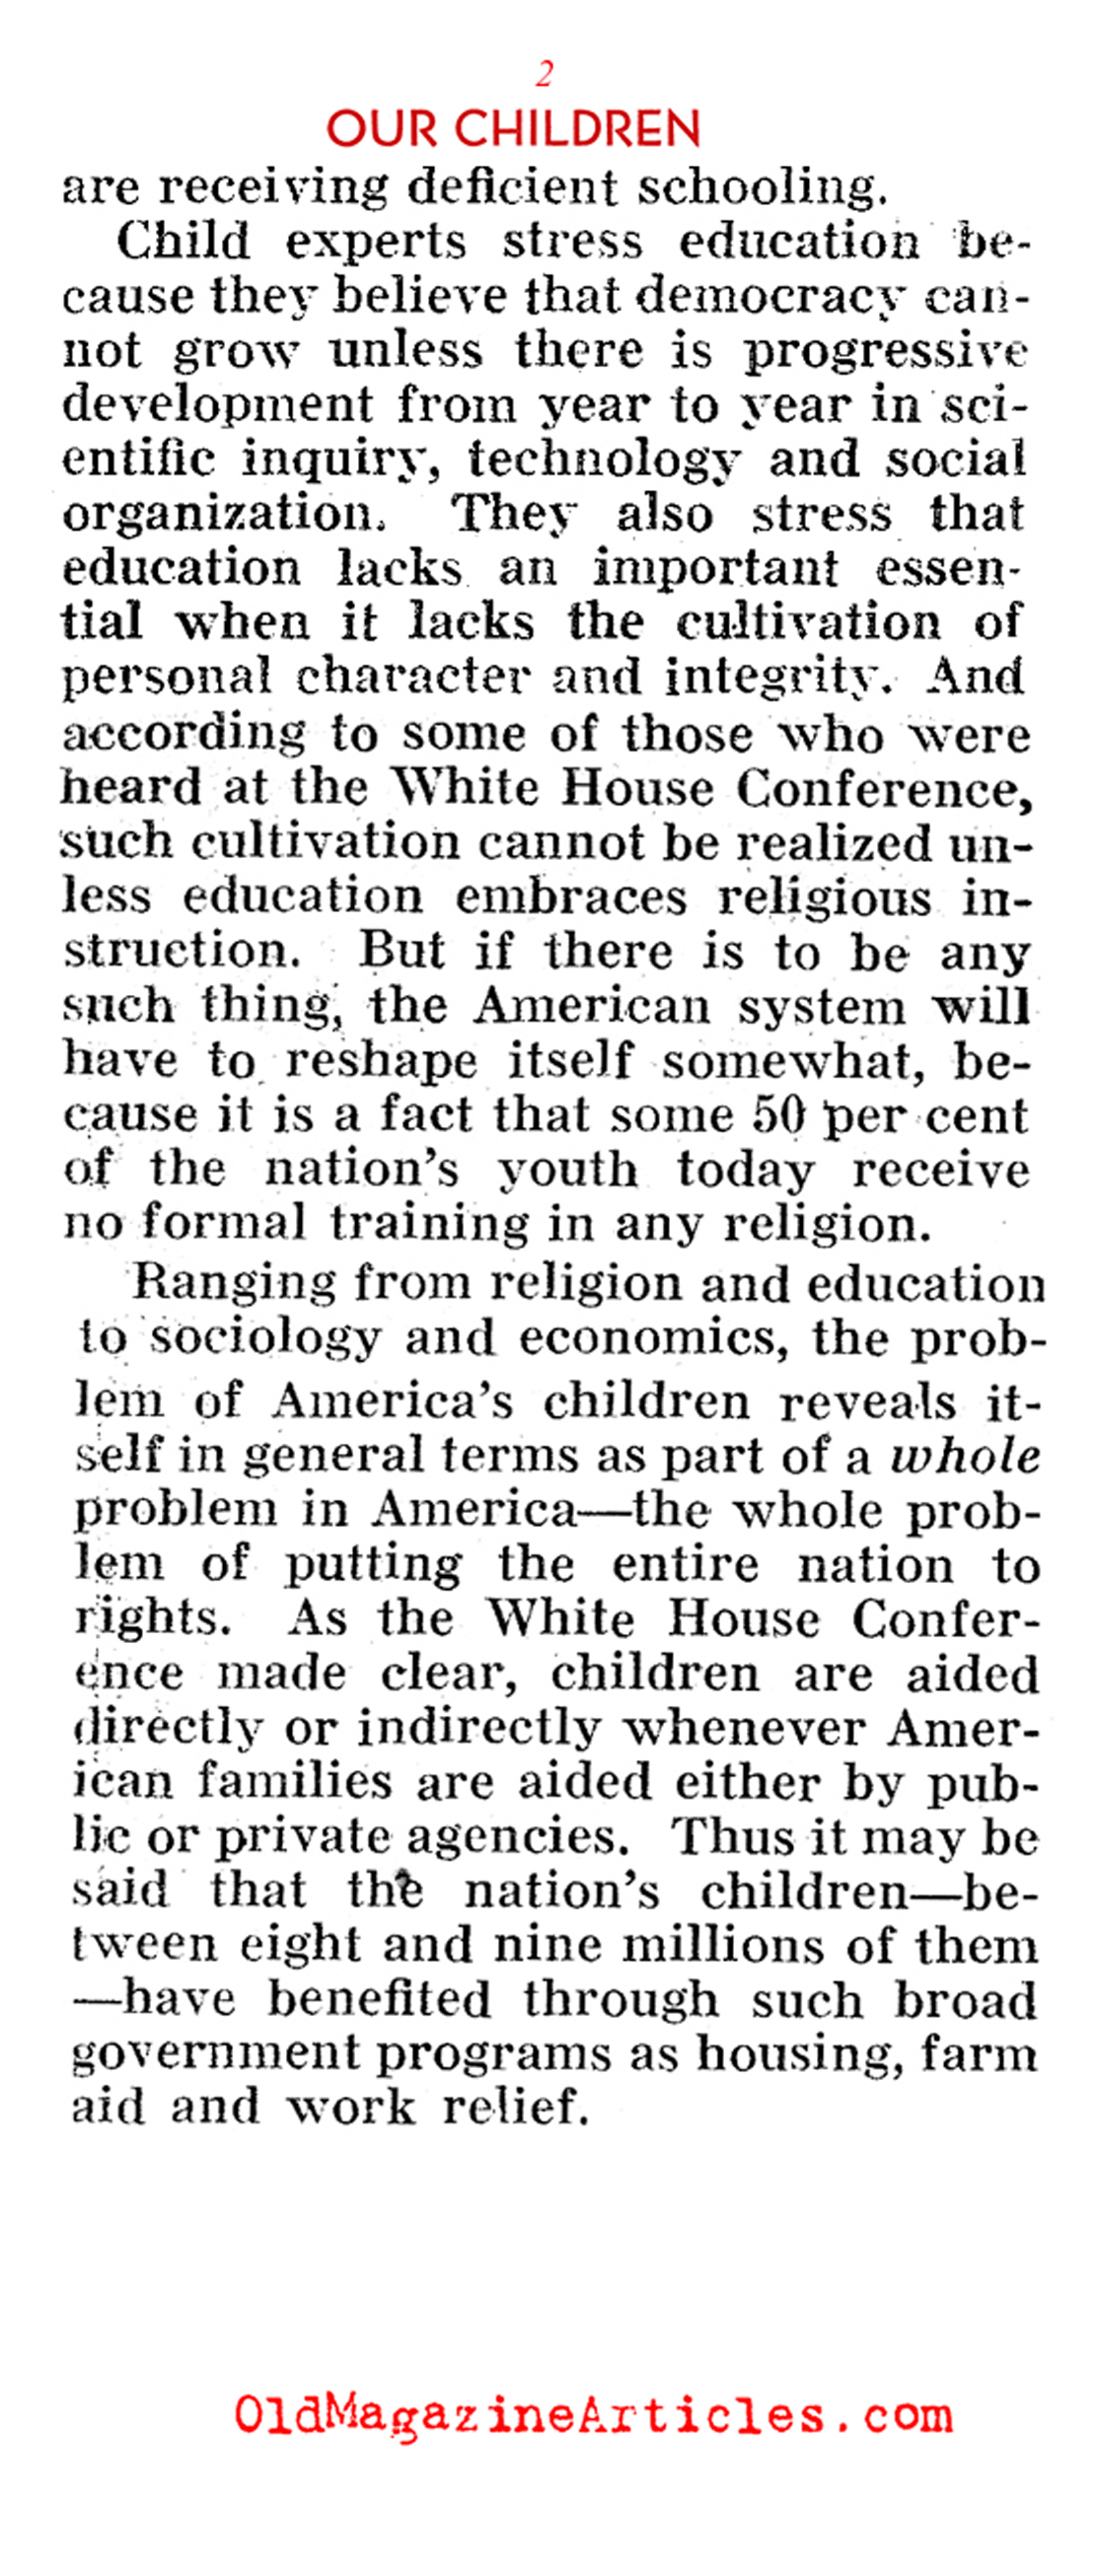 American Schools During the Great Depression (Pathfinder Magazine, 1940)